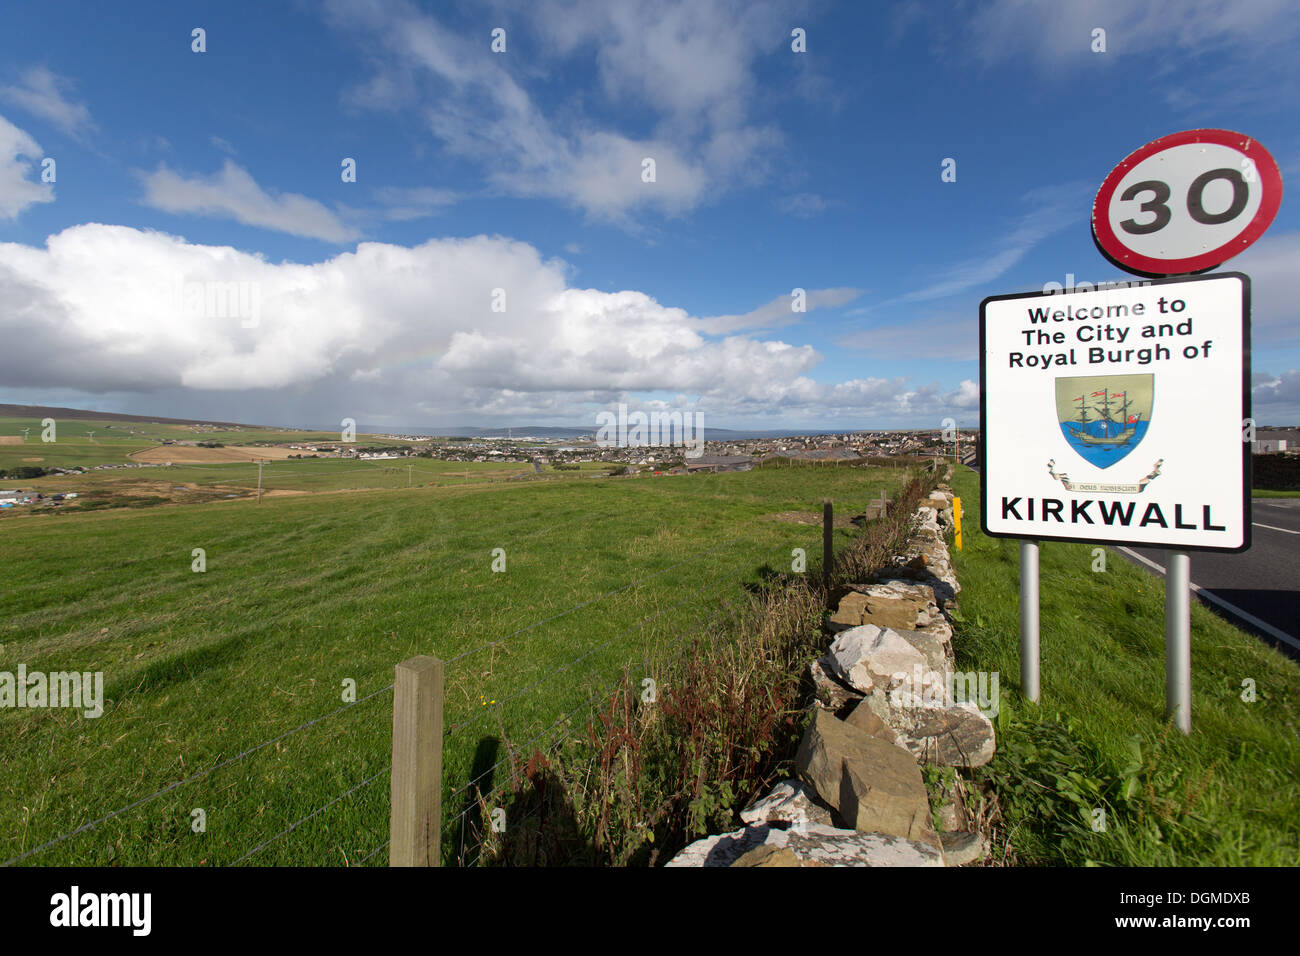 Islands of Orkney, Scotland. Kirkwall town boundary signpost on the A961 road, with Kirkwall in the background. Stock Photo